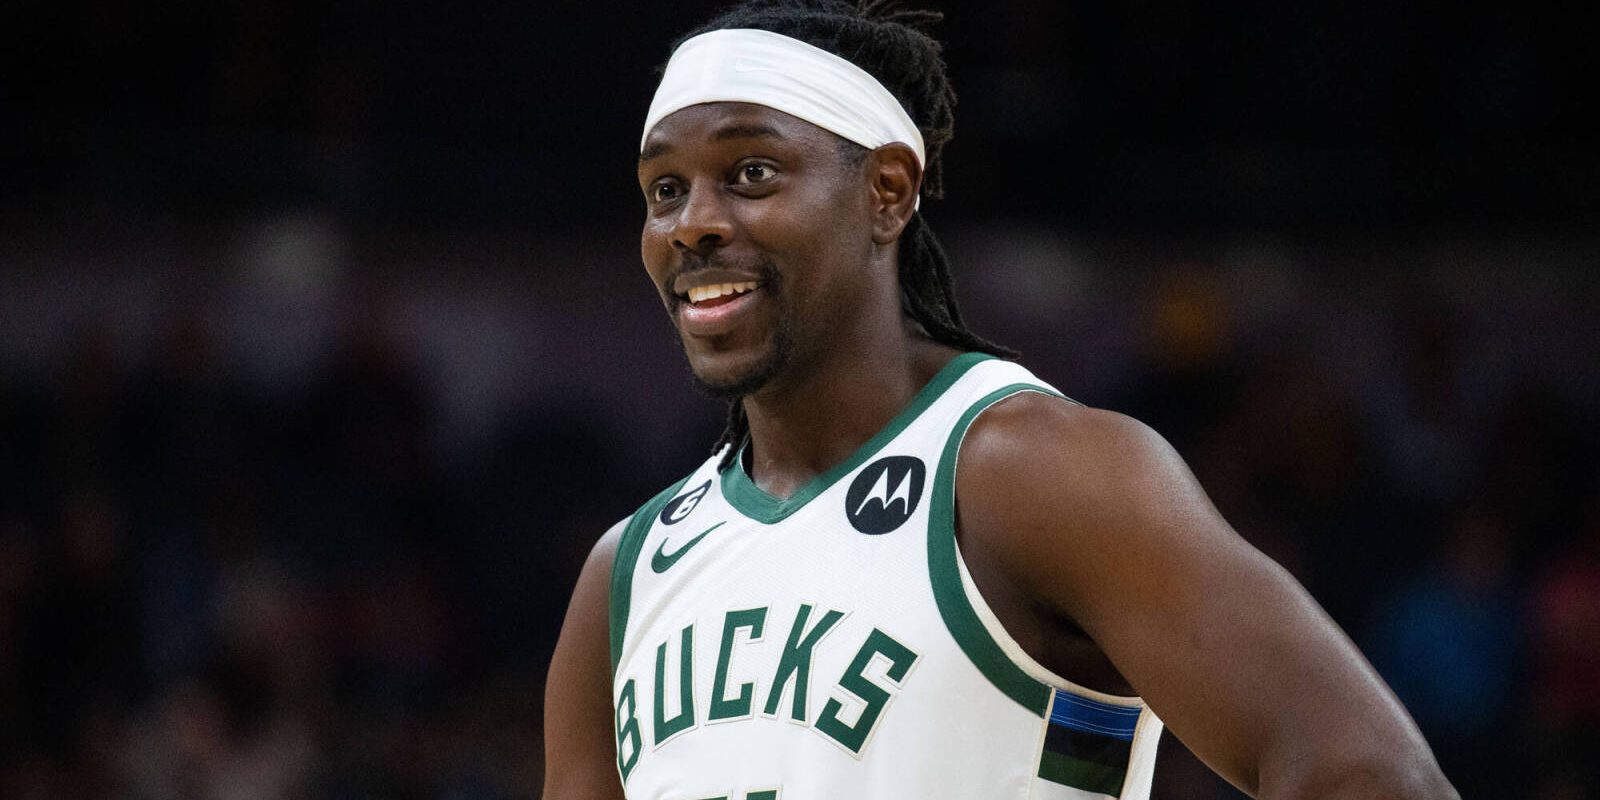 Mar 29, 2023; Indianapolis, Indiana, USA;Milwaukee Bucks guard Jrue Holiday (21) in the first quarter against the Indiana Pacers at Gainbridge Fieldhouse. Mandatory Credit: Trevor Ruszkowski-USA TODAY Sports